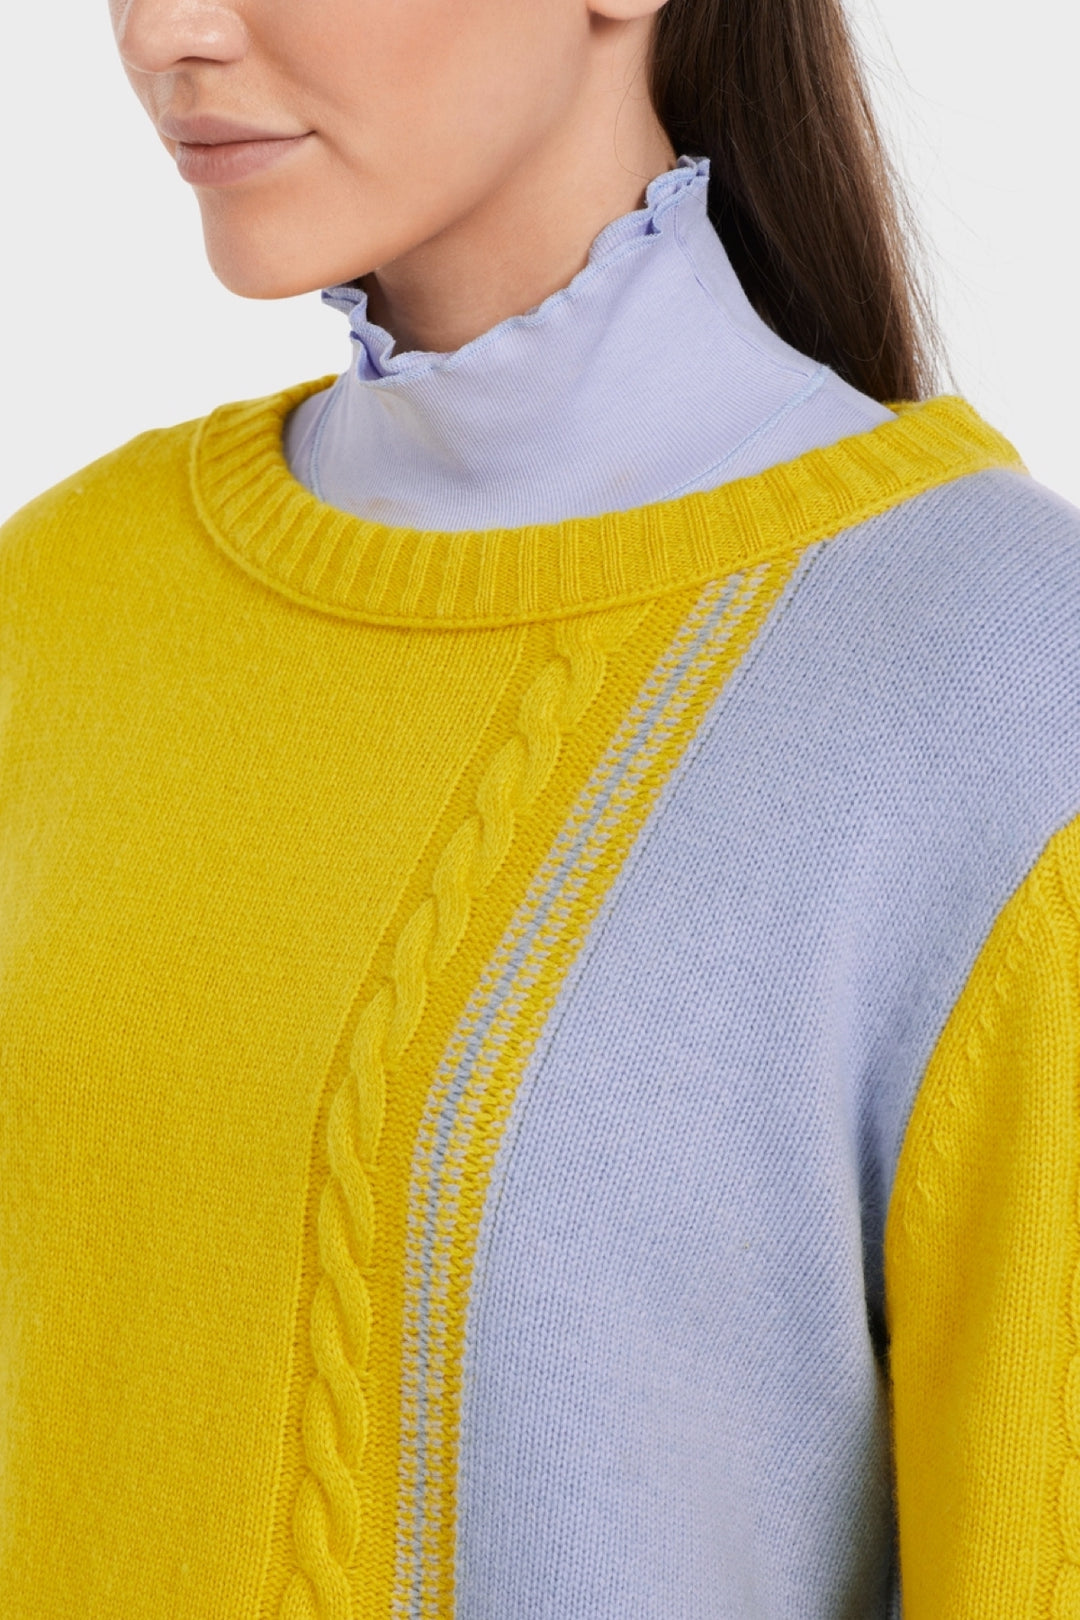 Stylish knitted sweater "Rethink Together"